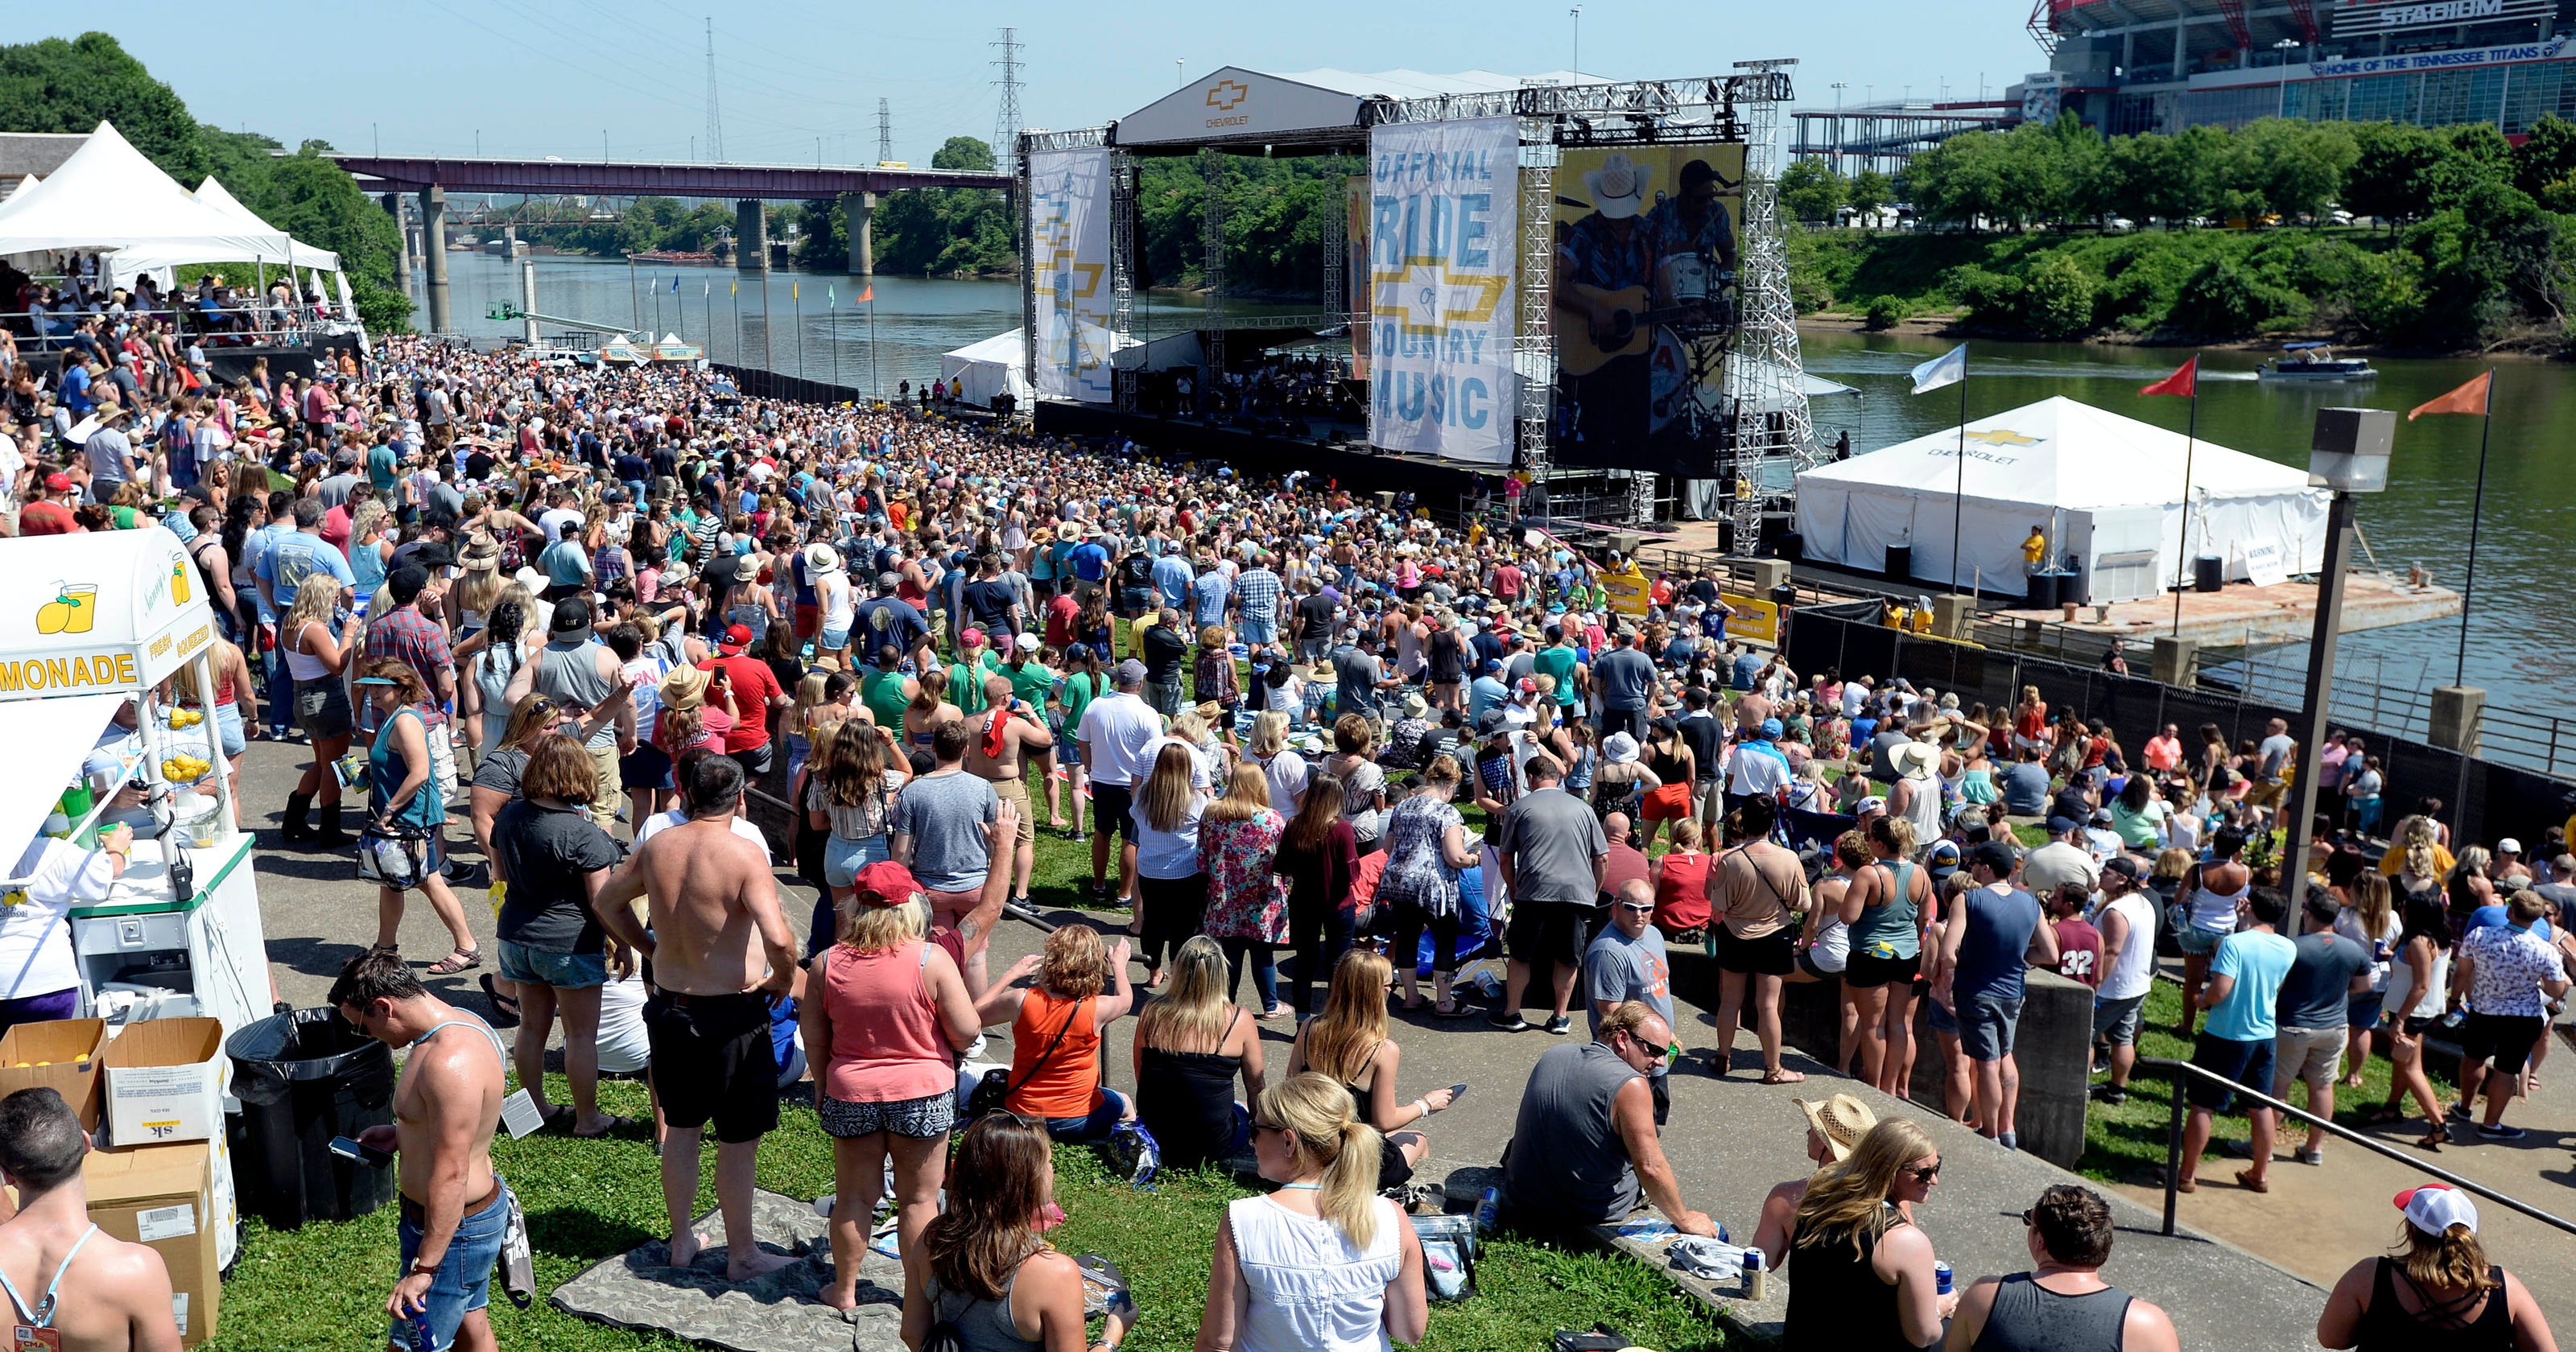 CMA Fest 2019: Block party of free concerts, food, events and more